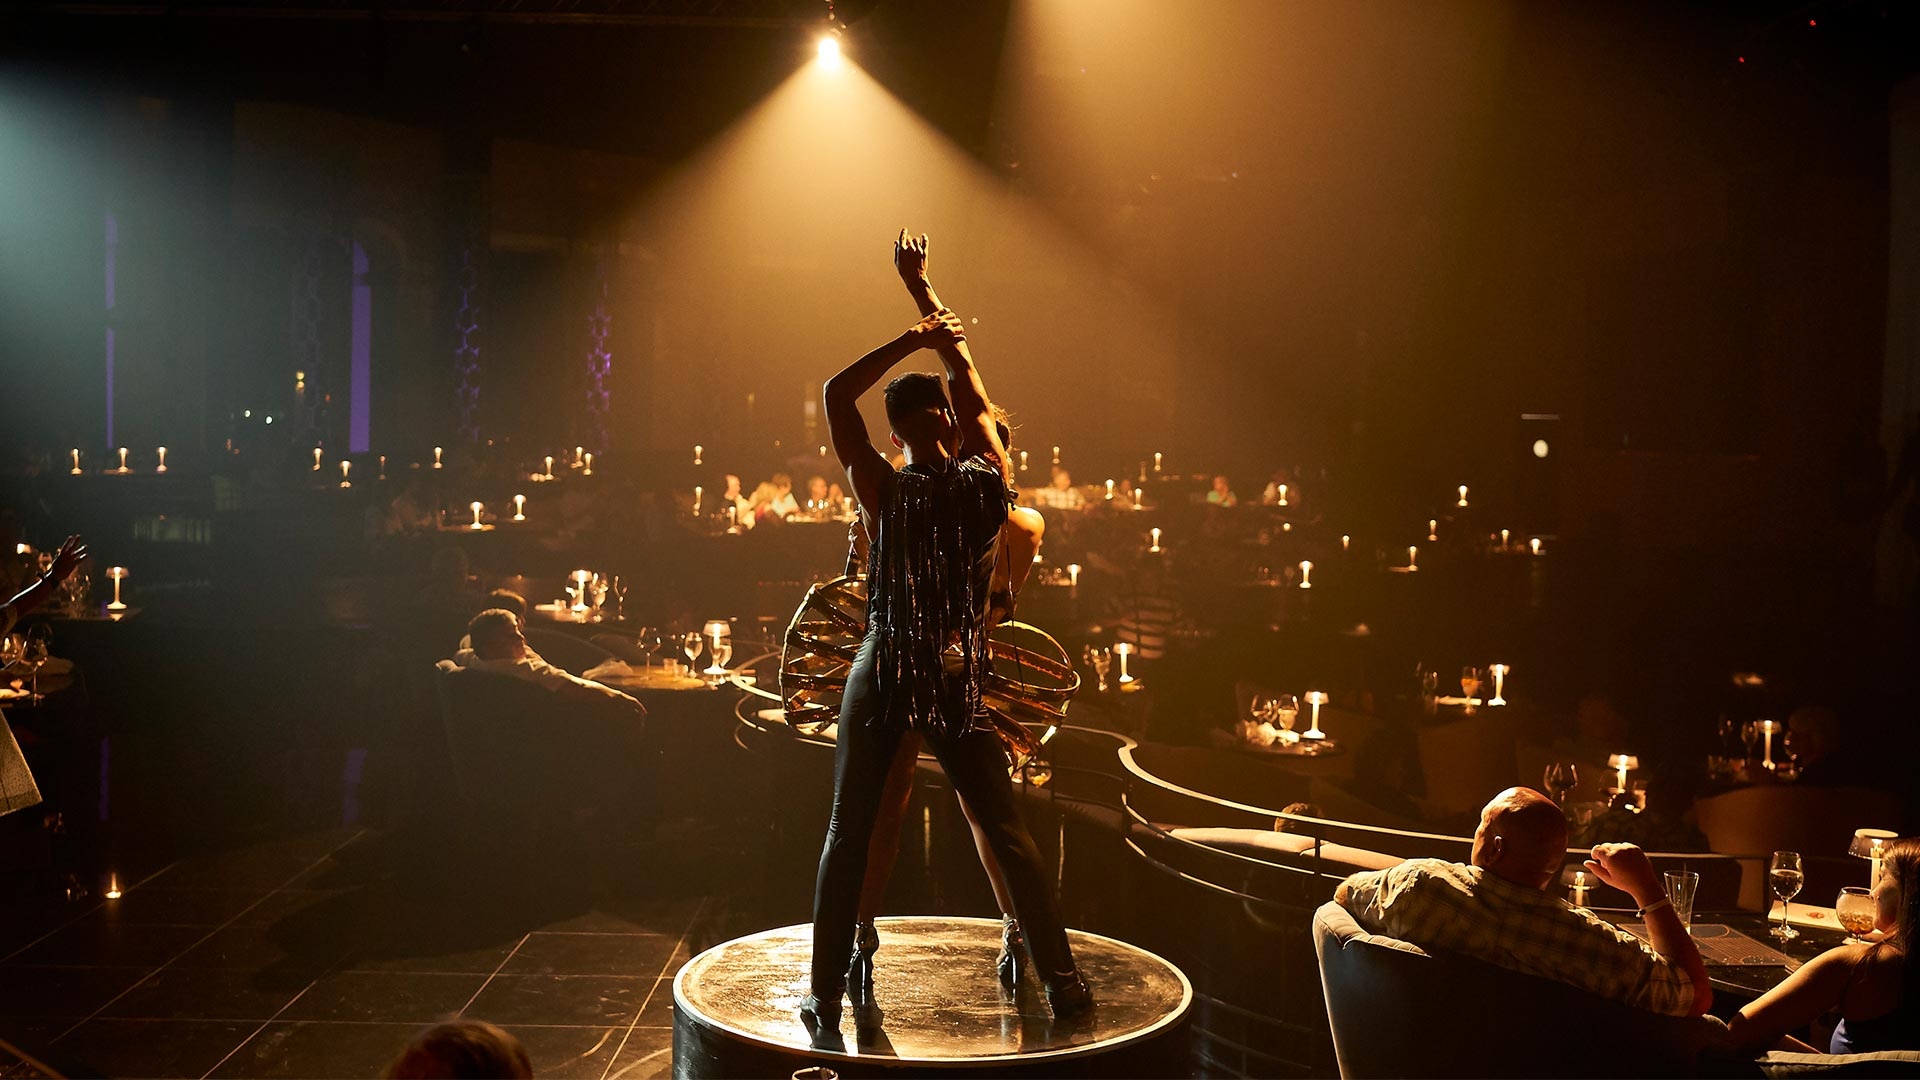 Cabaret: Floor show or comedy acts that are performed live in restaurants or nightclubs. 1920x1080 Full HD Wallpaper.